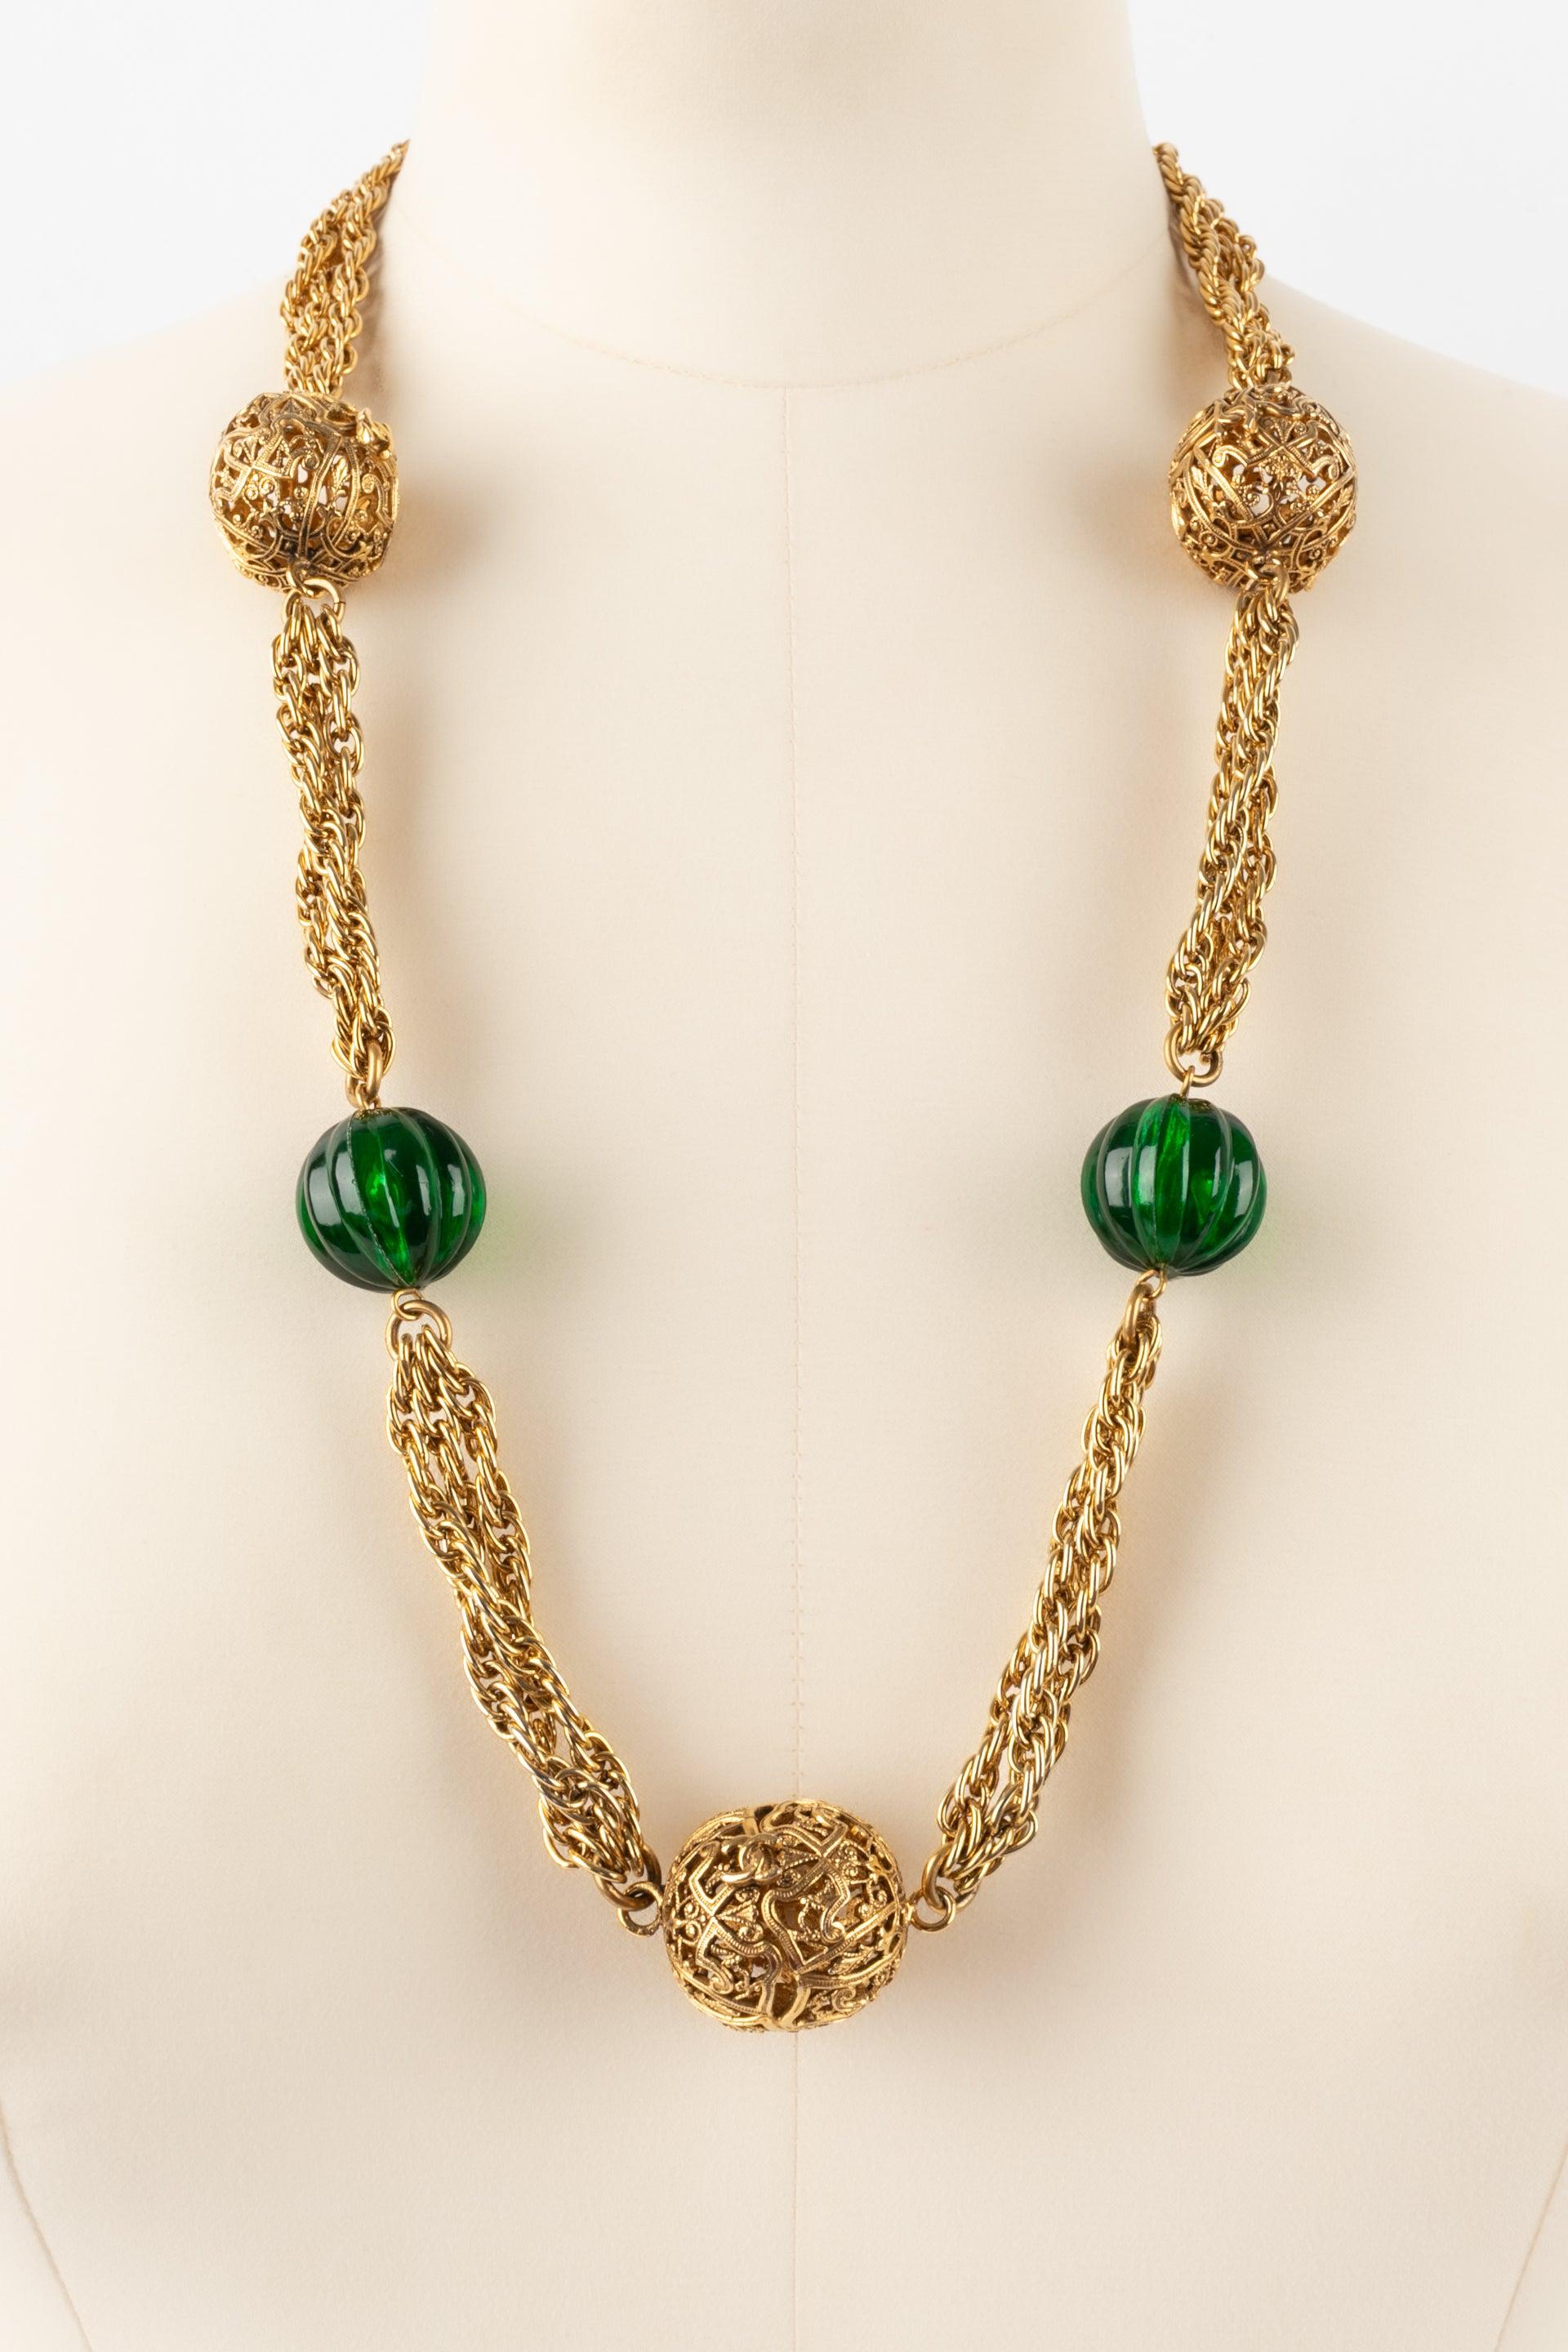 Chanel Golden Metal Necklace with Green Pearls, 1984 In Excellent Condition For Sale In SAINT-OUEN-SUR-SEINE, FR